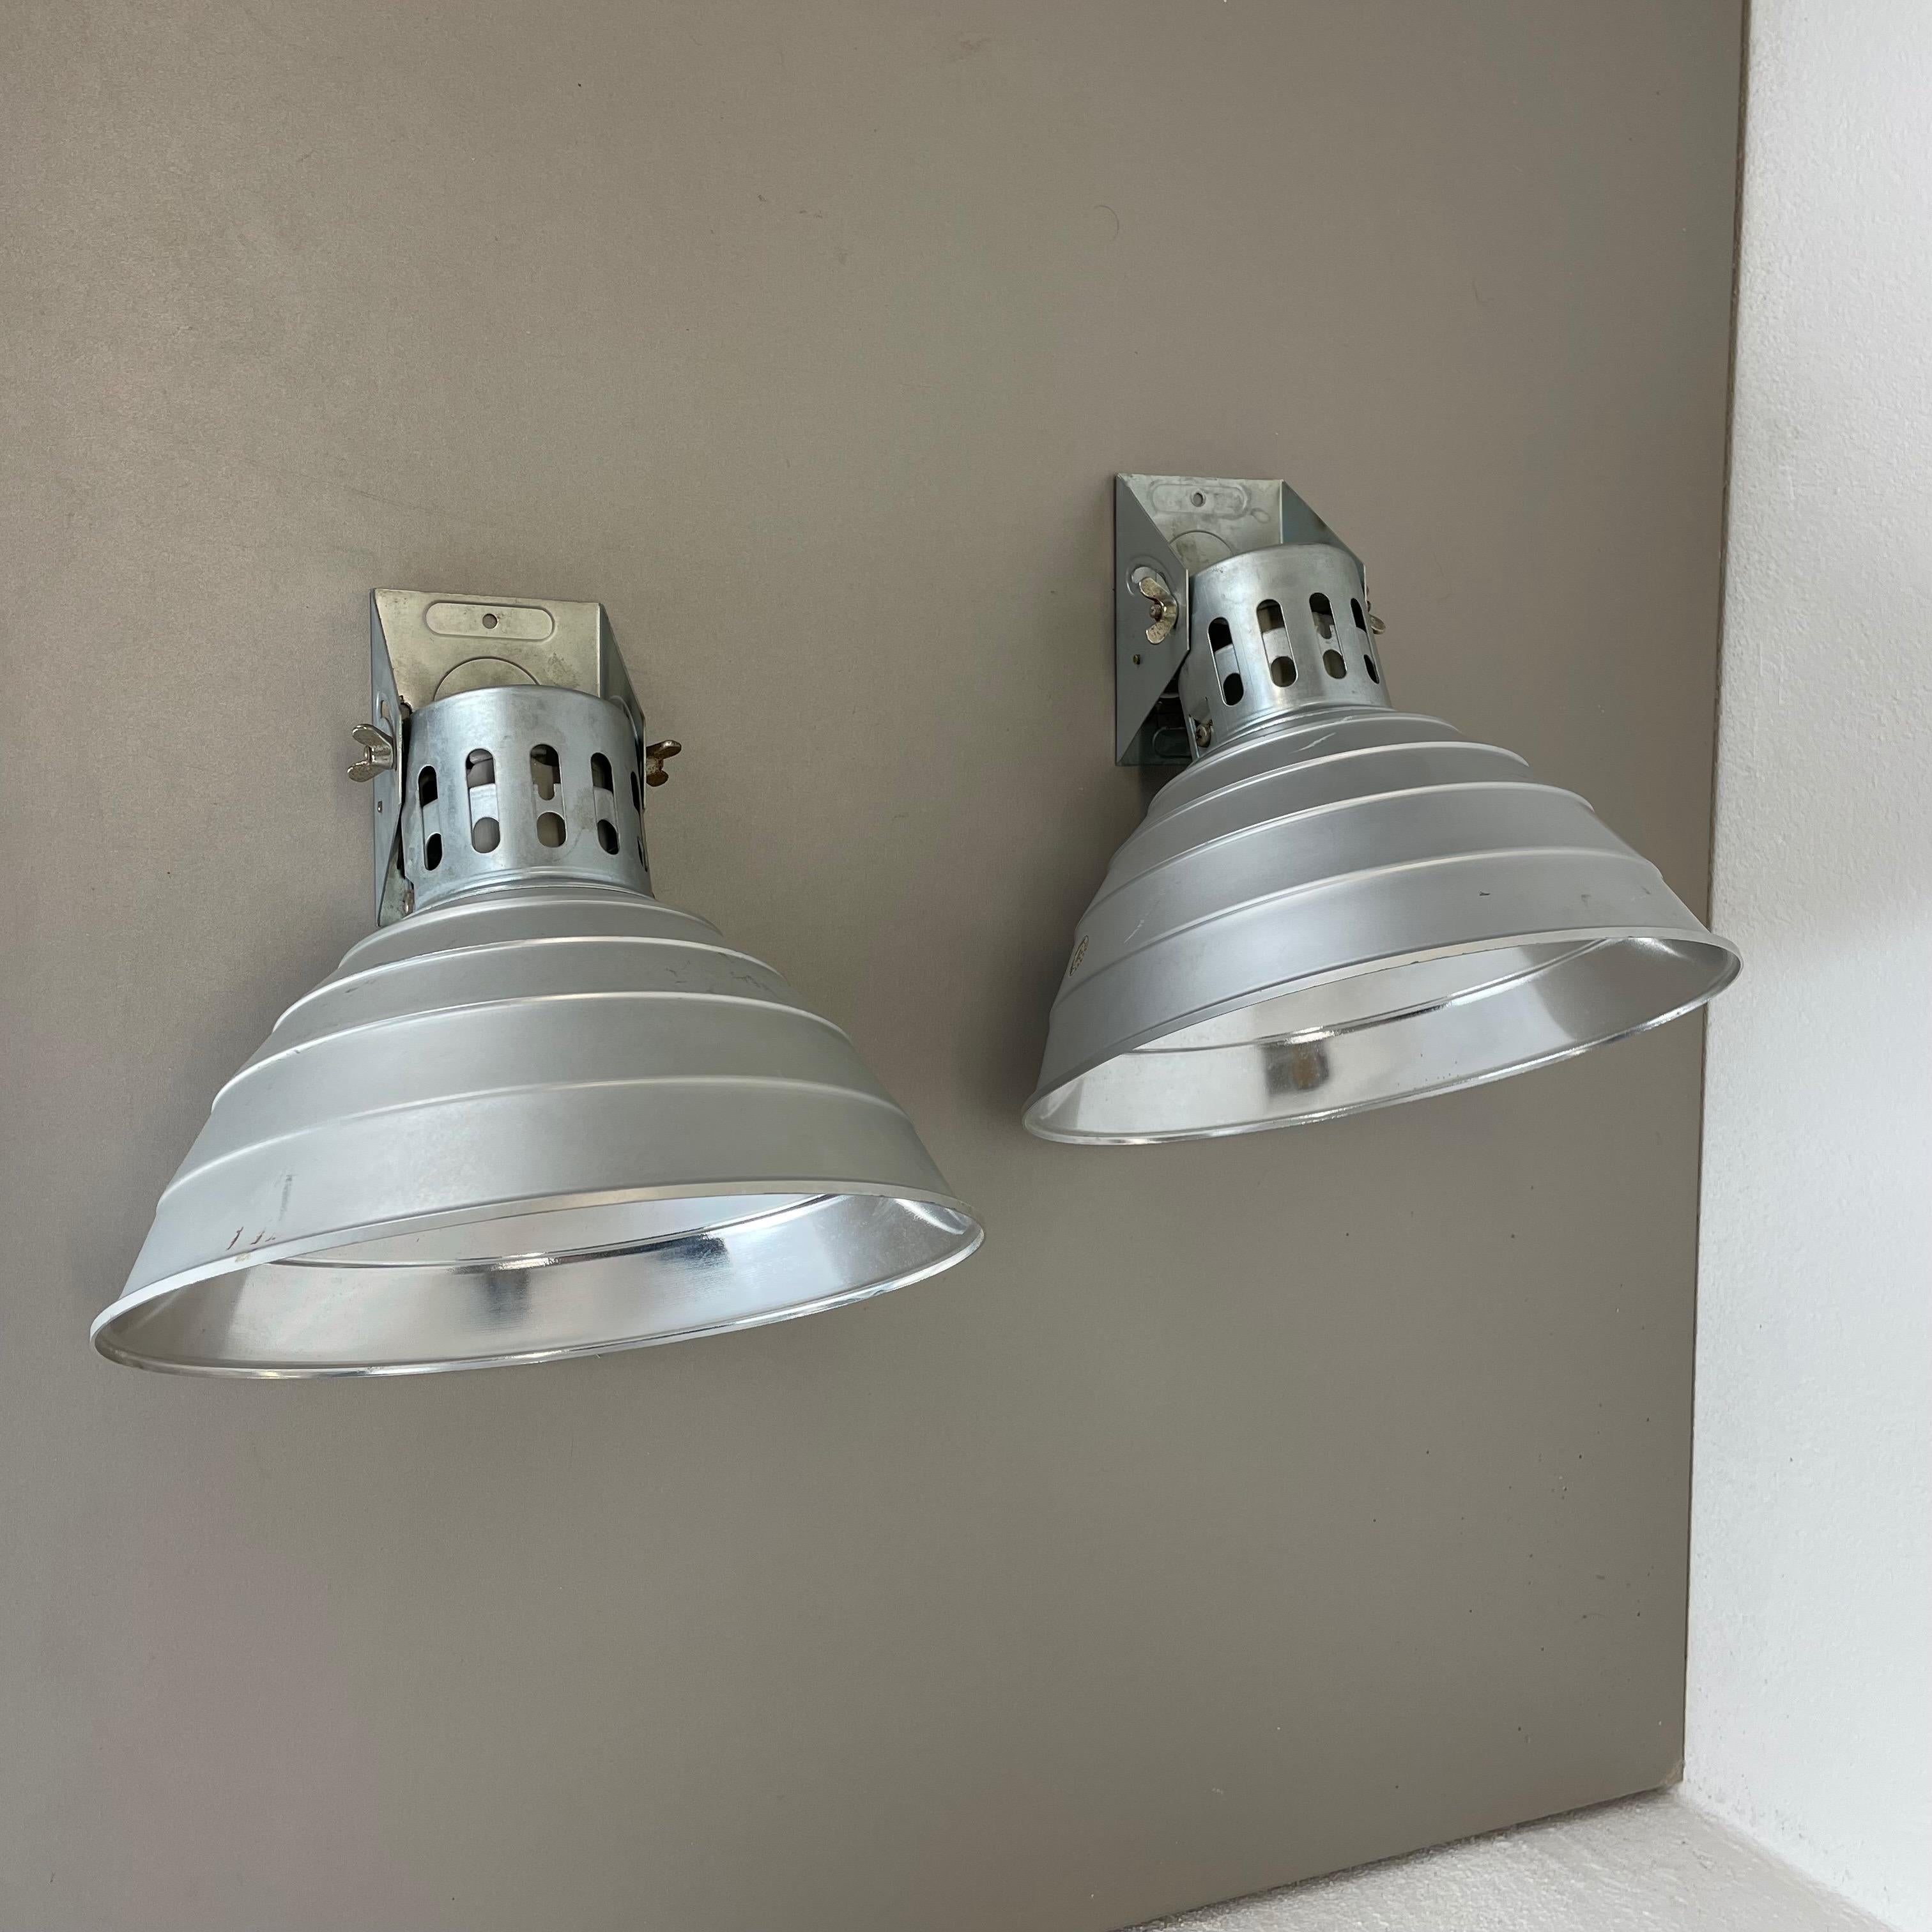 Article:

Set of two fotostudio lights


Producer:

Zeiss Ikon, Germany


Origin:

Germany.


Age:

1970s.


Original 1970s modernist German wall light made of solid metal with aluminium shade. This super rare set of lights were